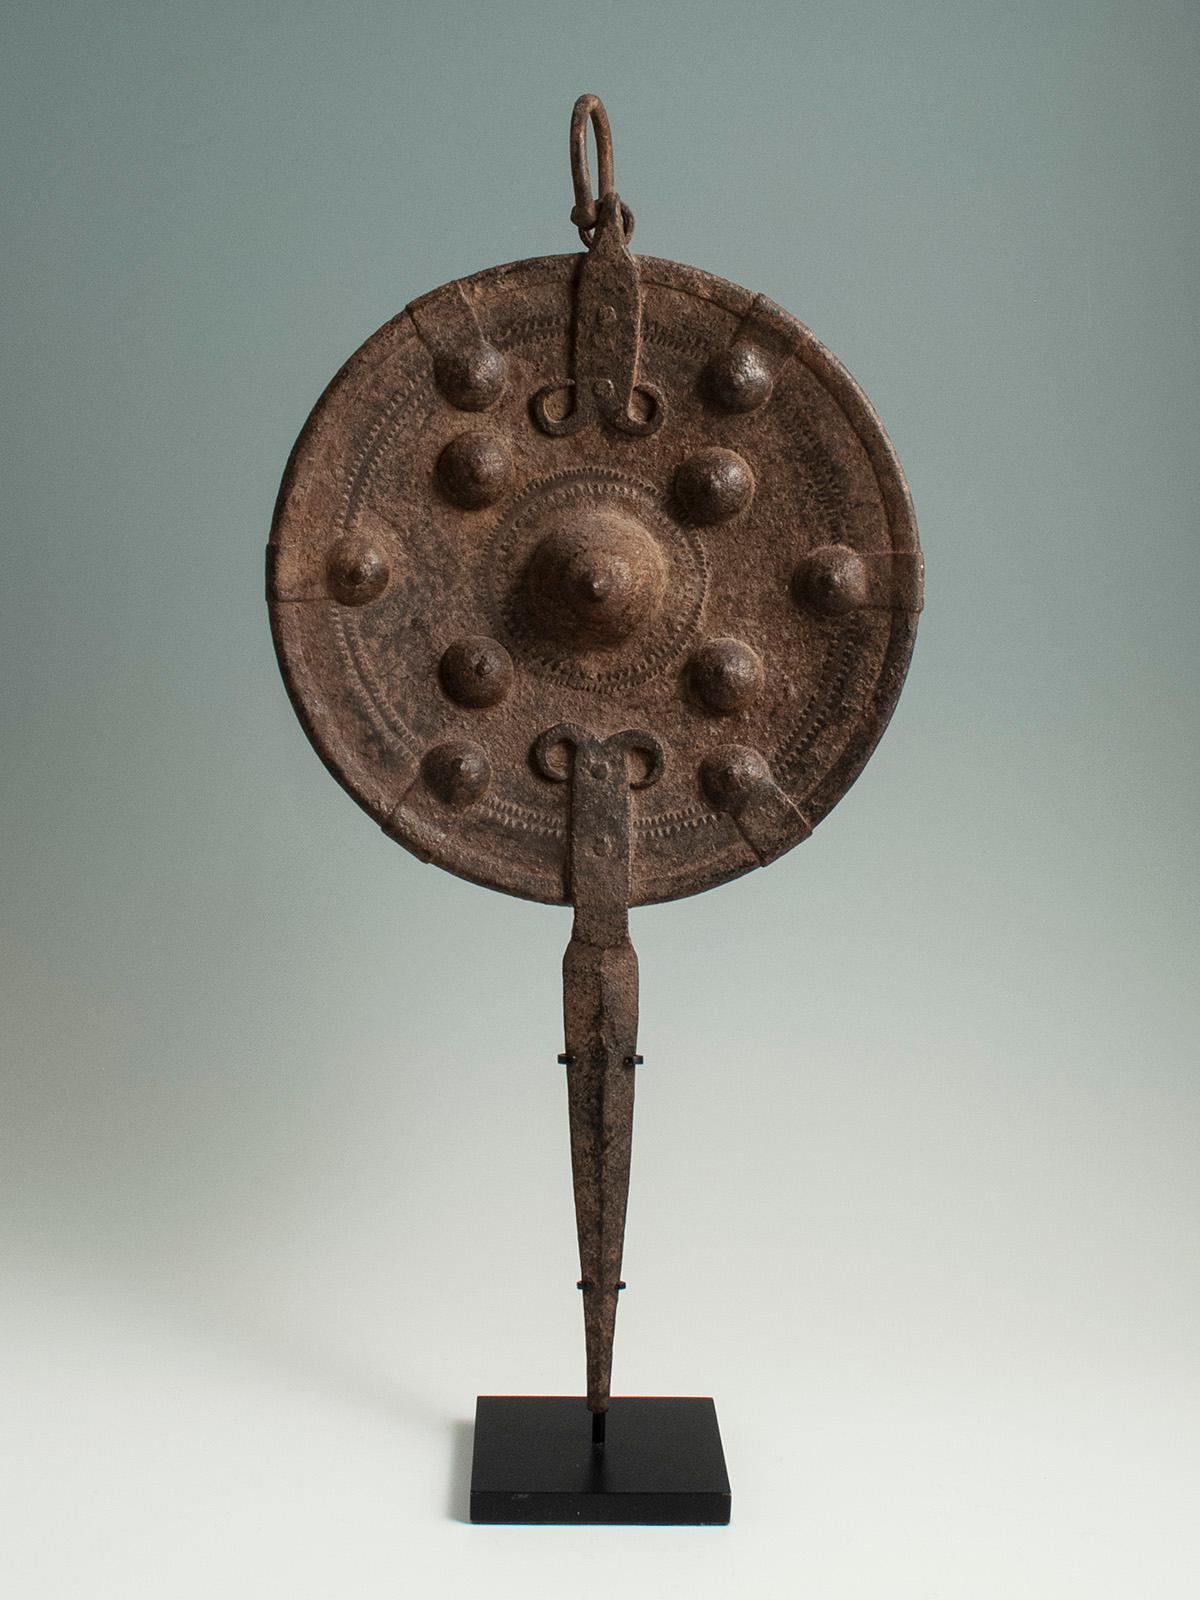 18th Century Iron Buckler Parrying Shield, Santal Region, Northern India

A small yet stately iron parrying shield from the Santal region of Northern India. The ten conical domes may be brass or iron, and the surface is covered overall with an